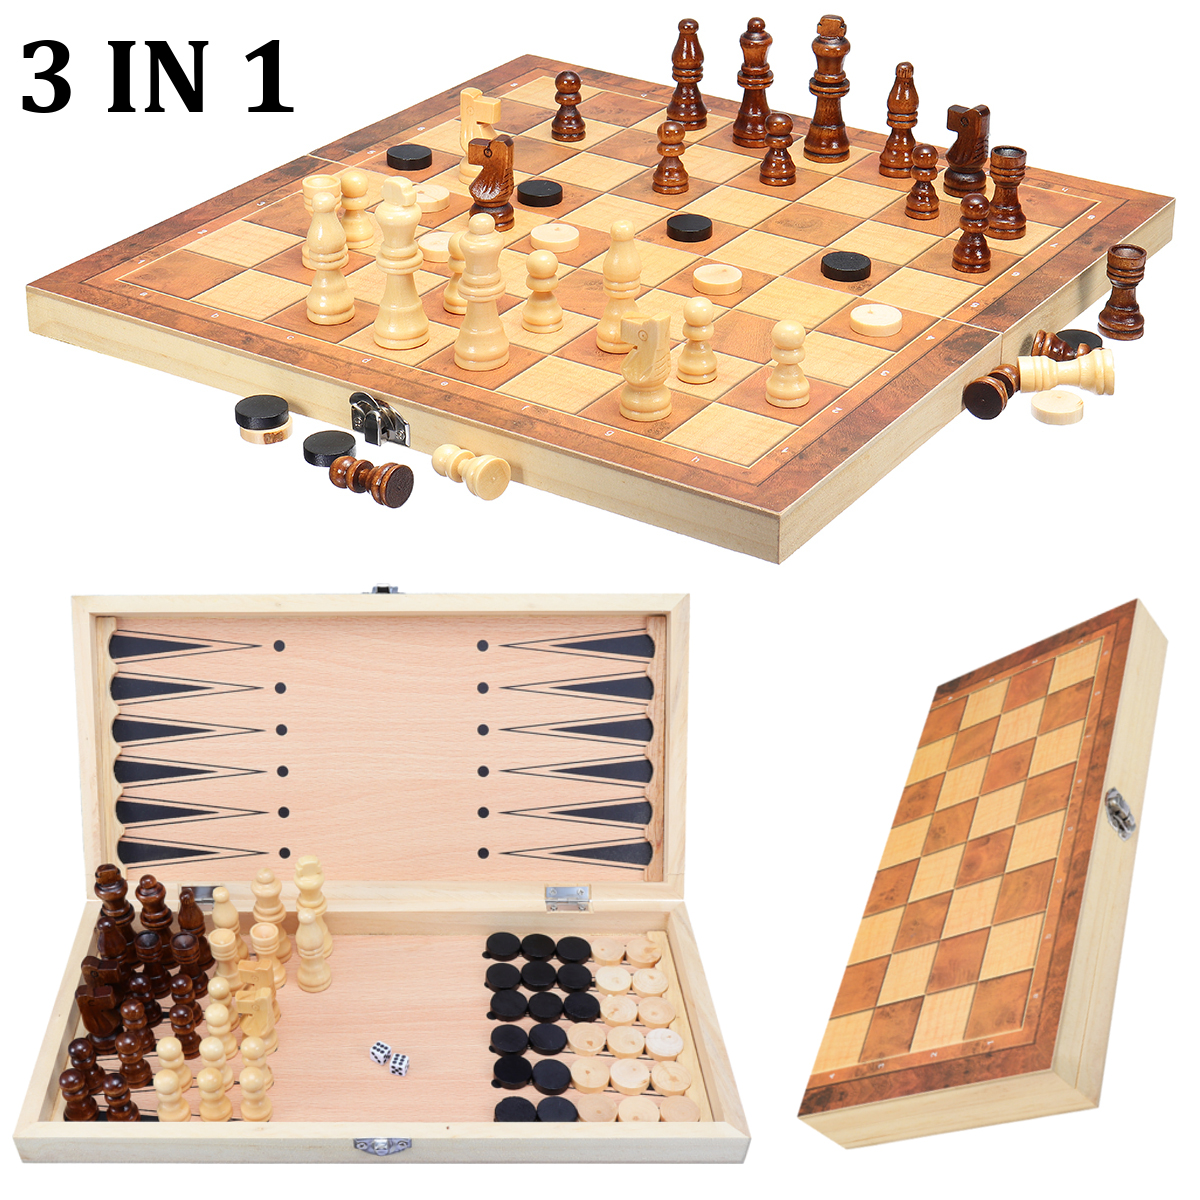 Large FOLDING WOODEN CHESS SET Board Game Checkers Backgammon Draughts Toy, 